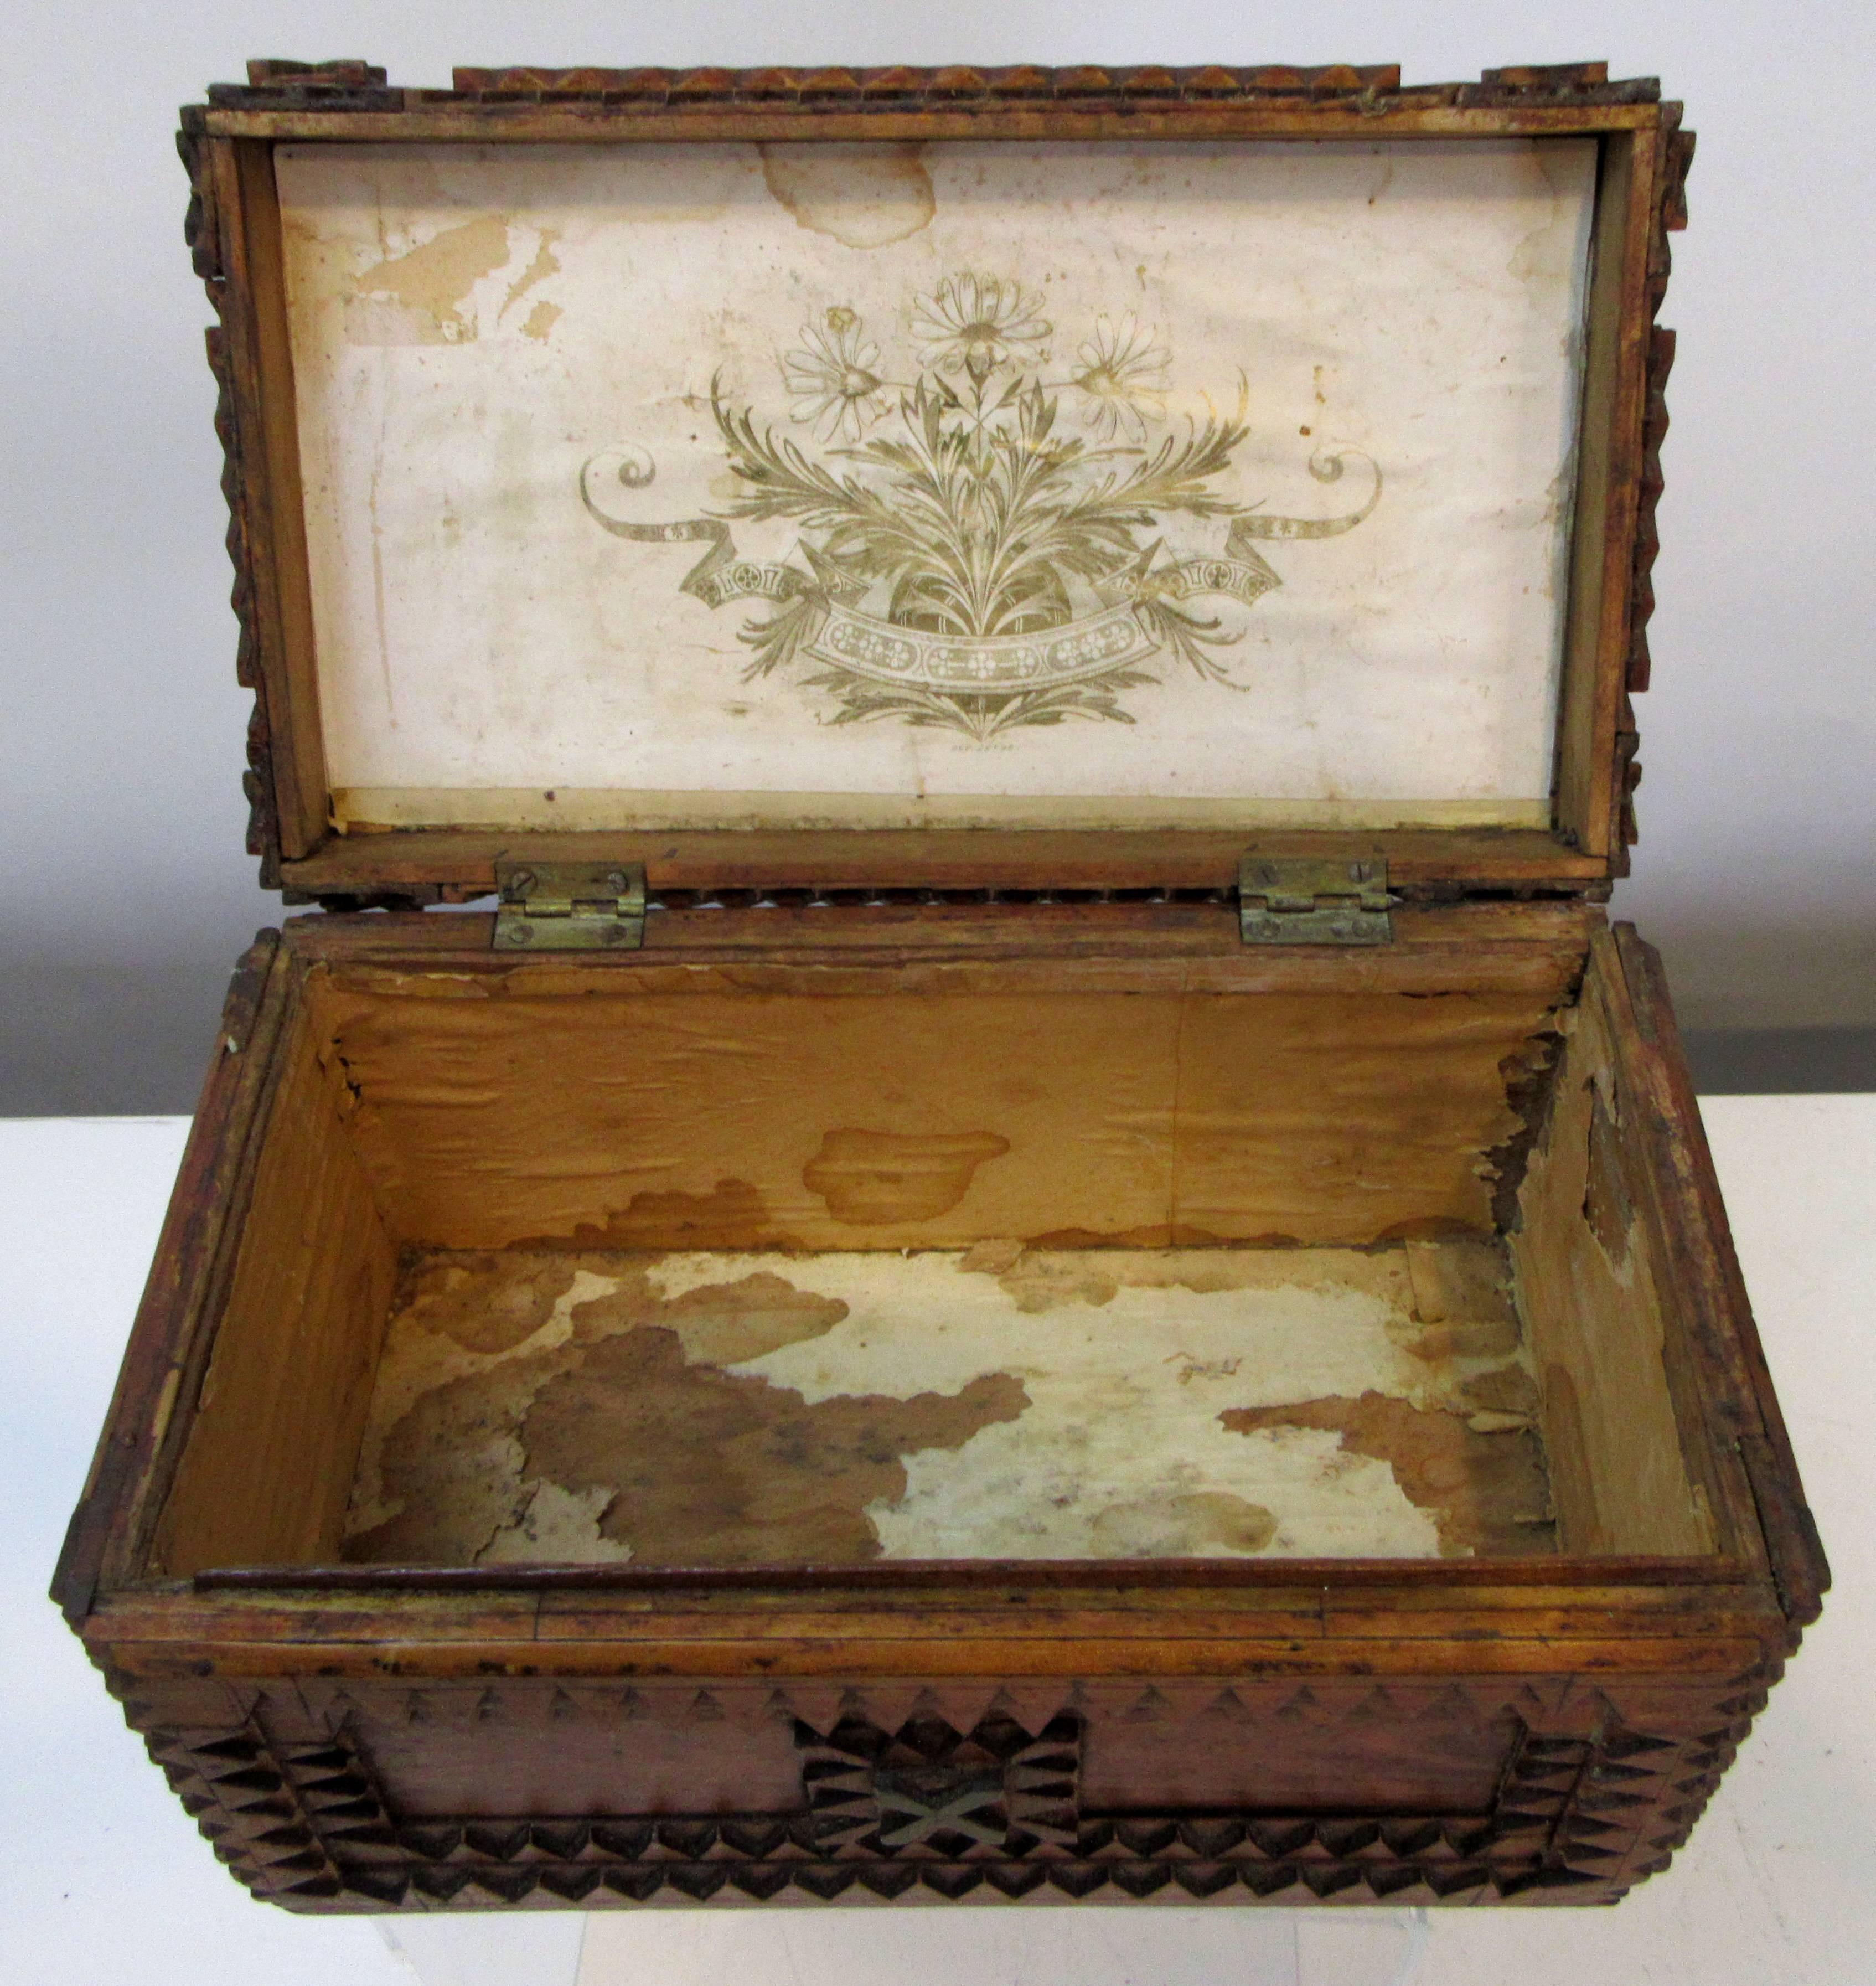 A hinged lid Tramp Art box made using a Schutz Marke Deponirt Razor Box from Germany. The inside of the lid is lined with a gold flower and banner pattern.